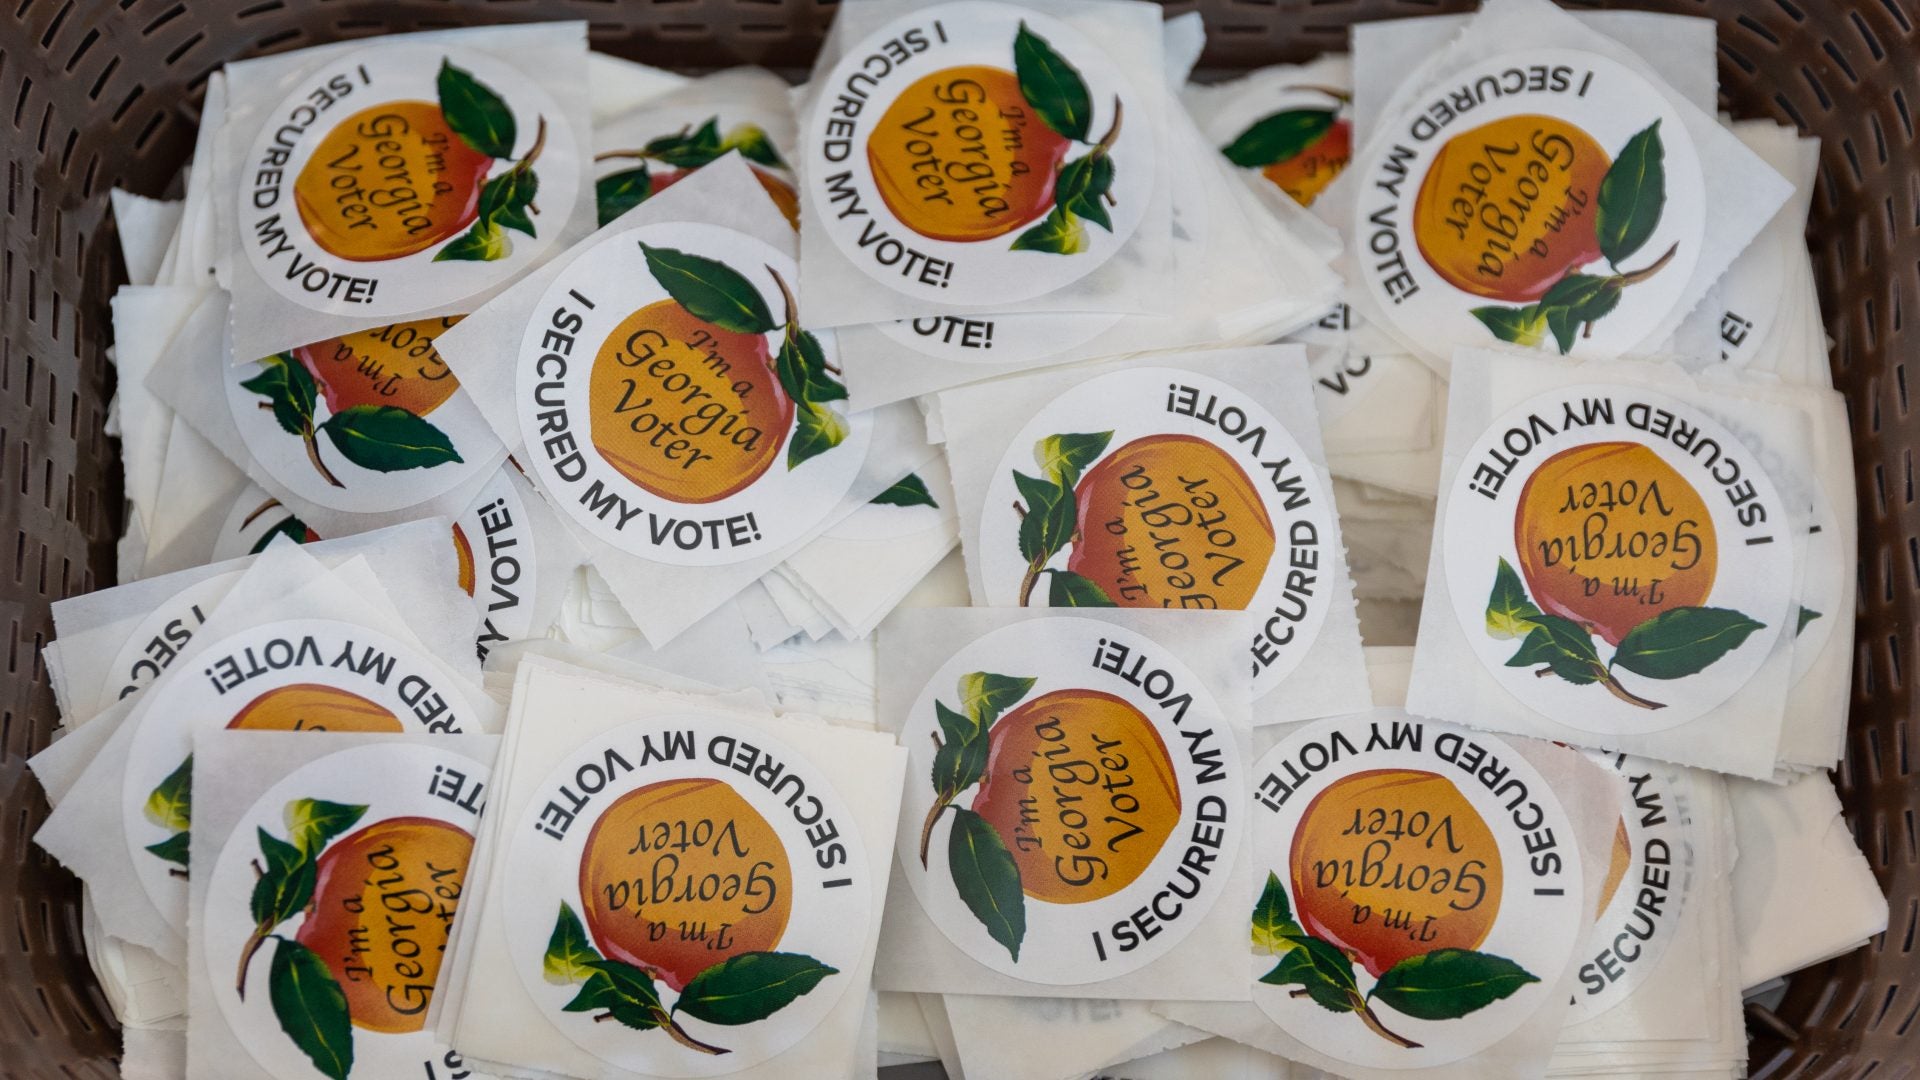 Peach Better Have My Vote: Some Georgians Didn't Receive Their Absentee Ballots